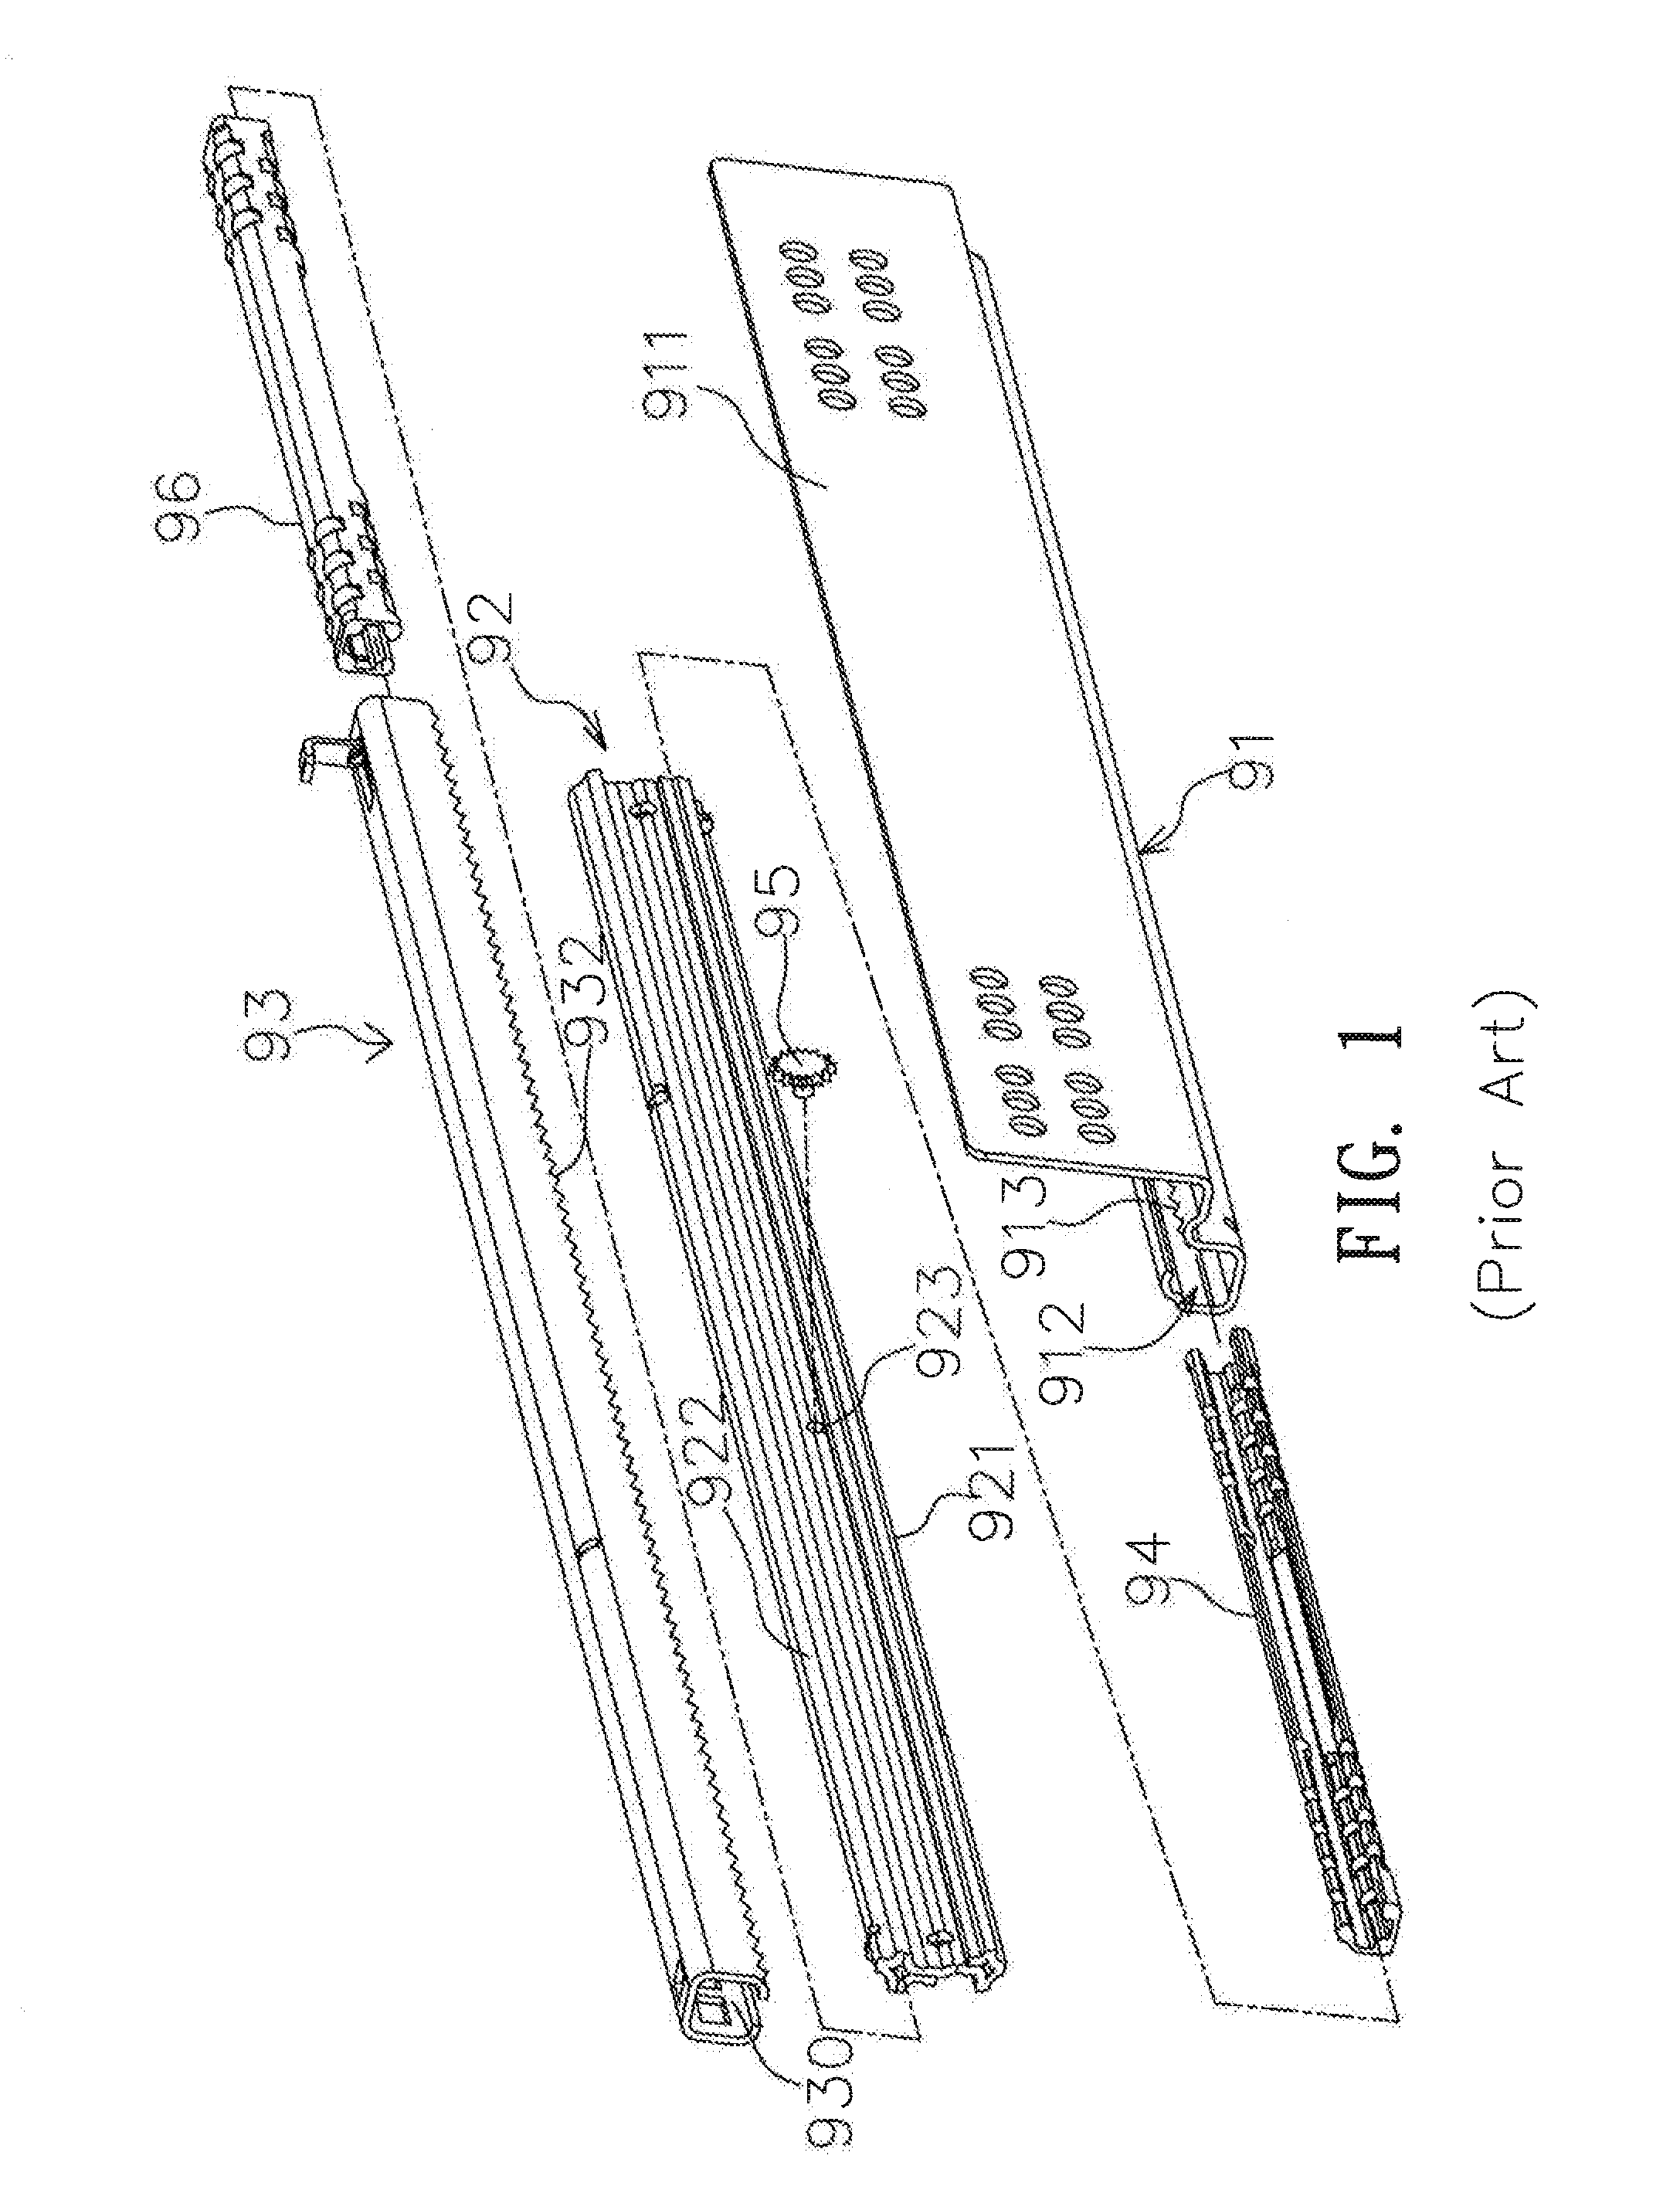 Track-based synchronous interlinking device